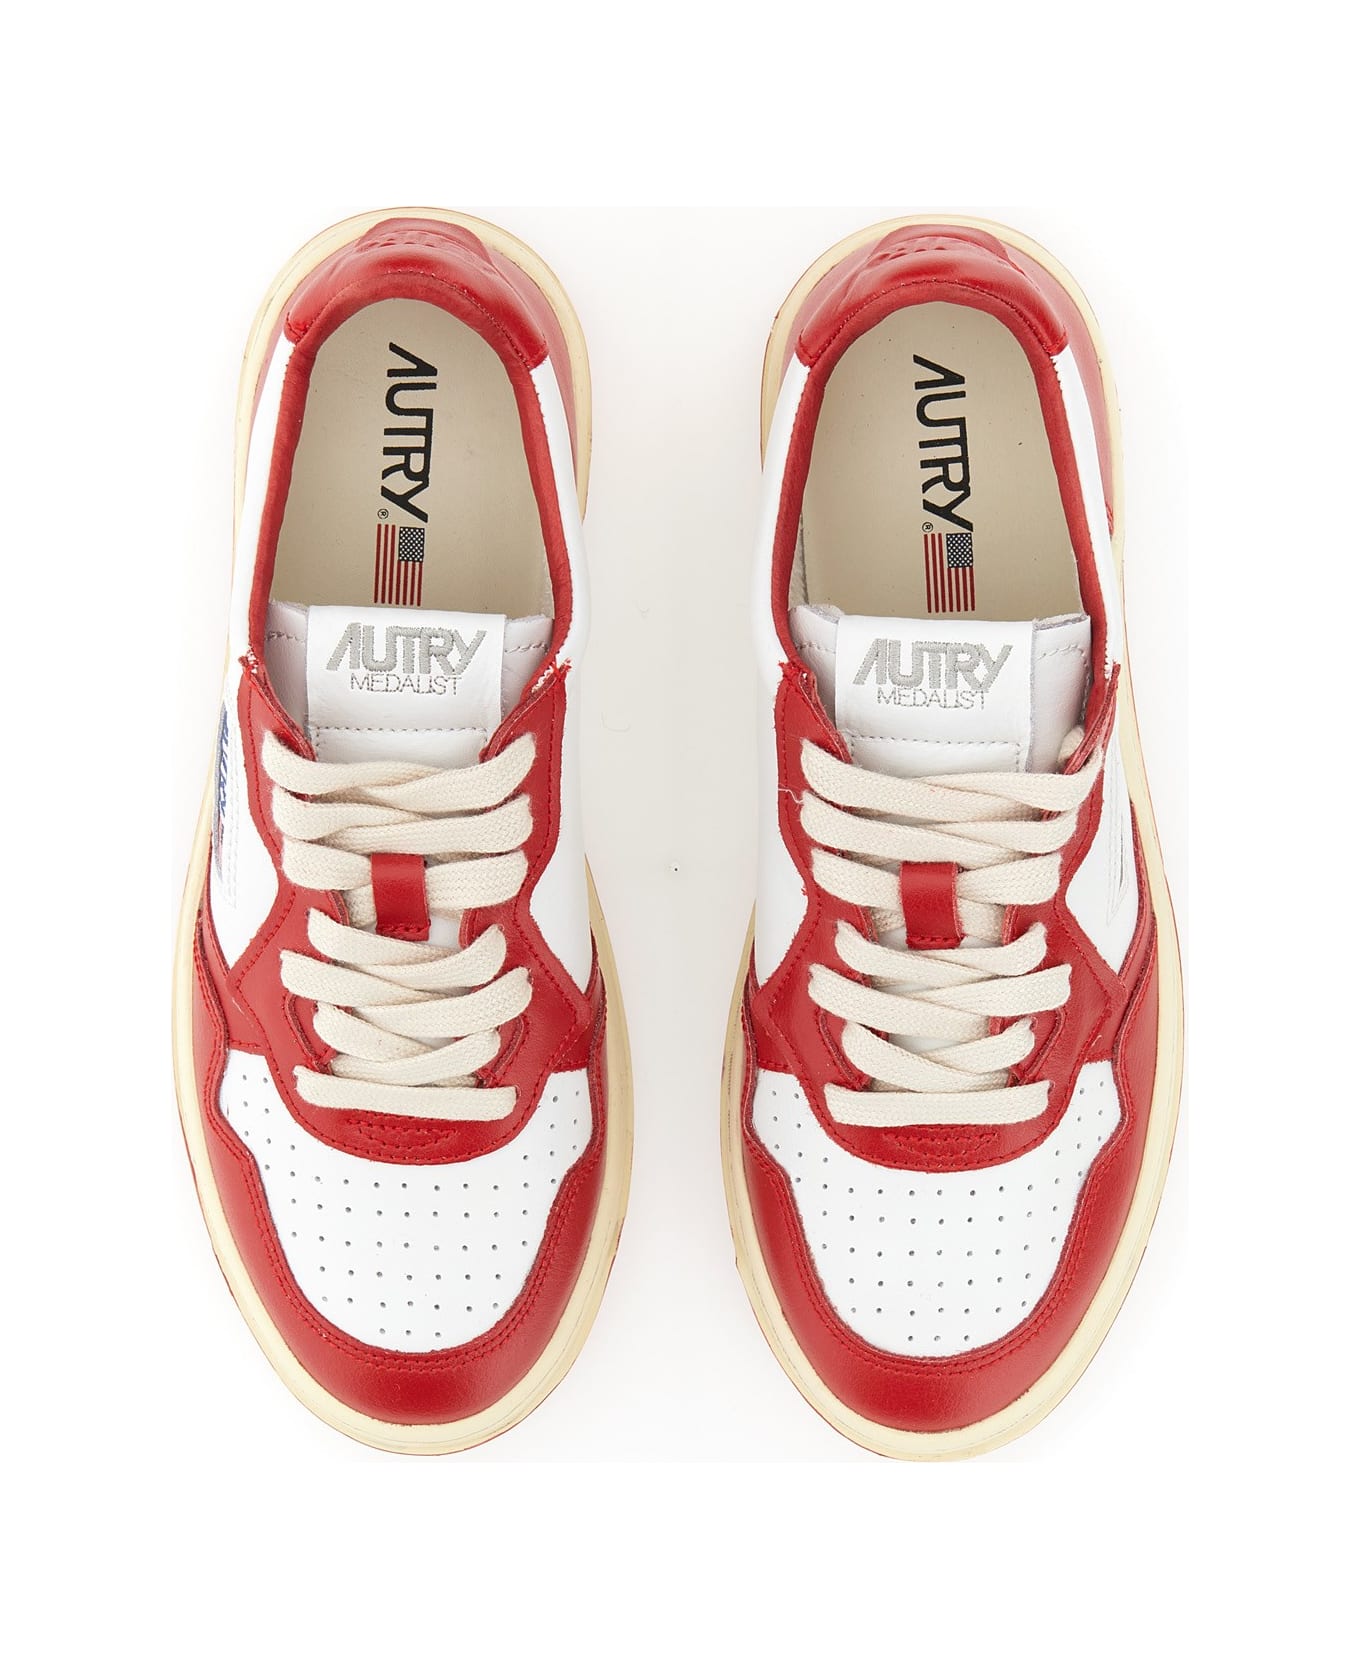 Autry 01 Sneakers In Red Leather - Red スニーカー